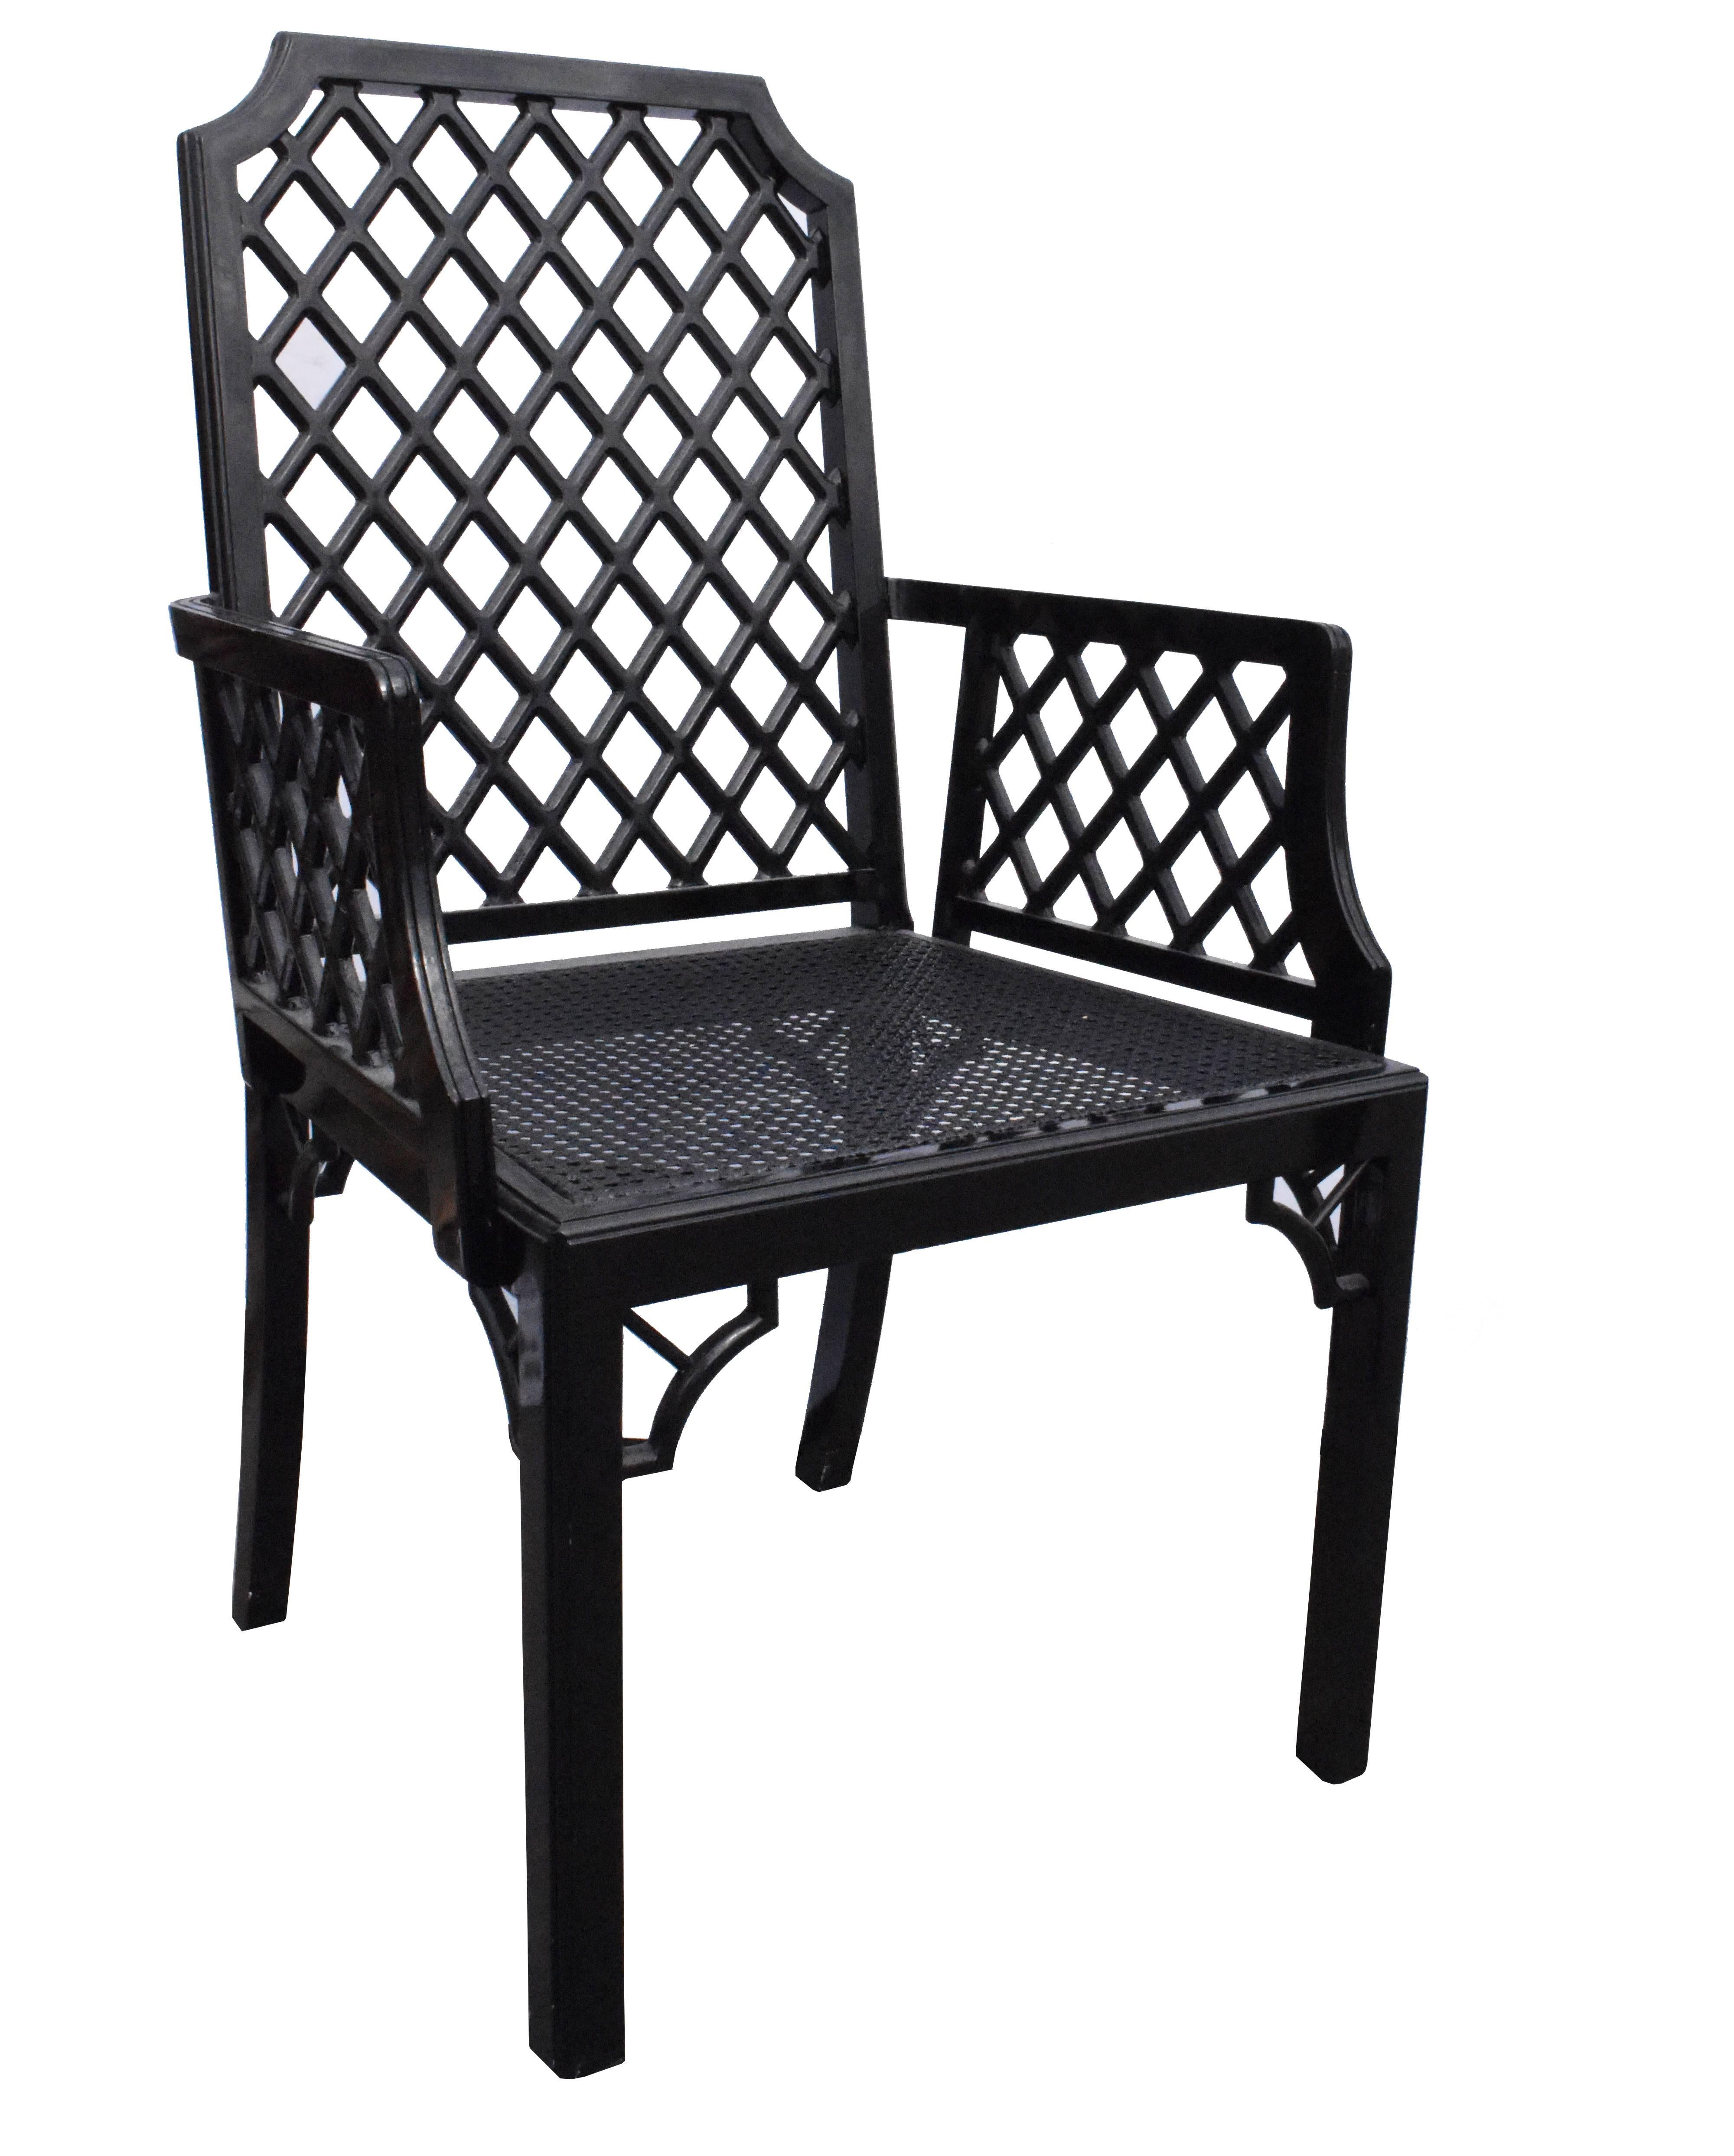 1980s black lacquered wooden set of four chairs and two armchairs. Seats decorated in rattan grid pattern.